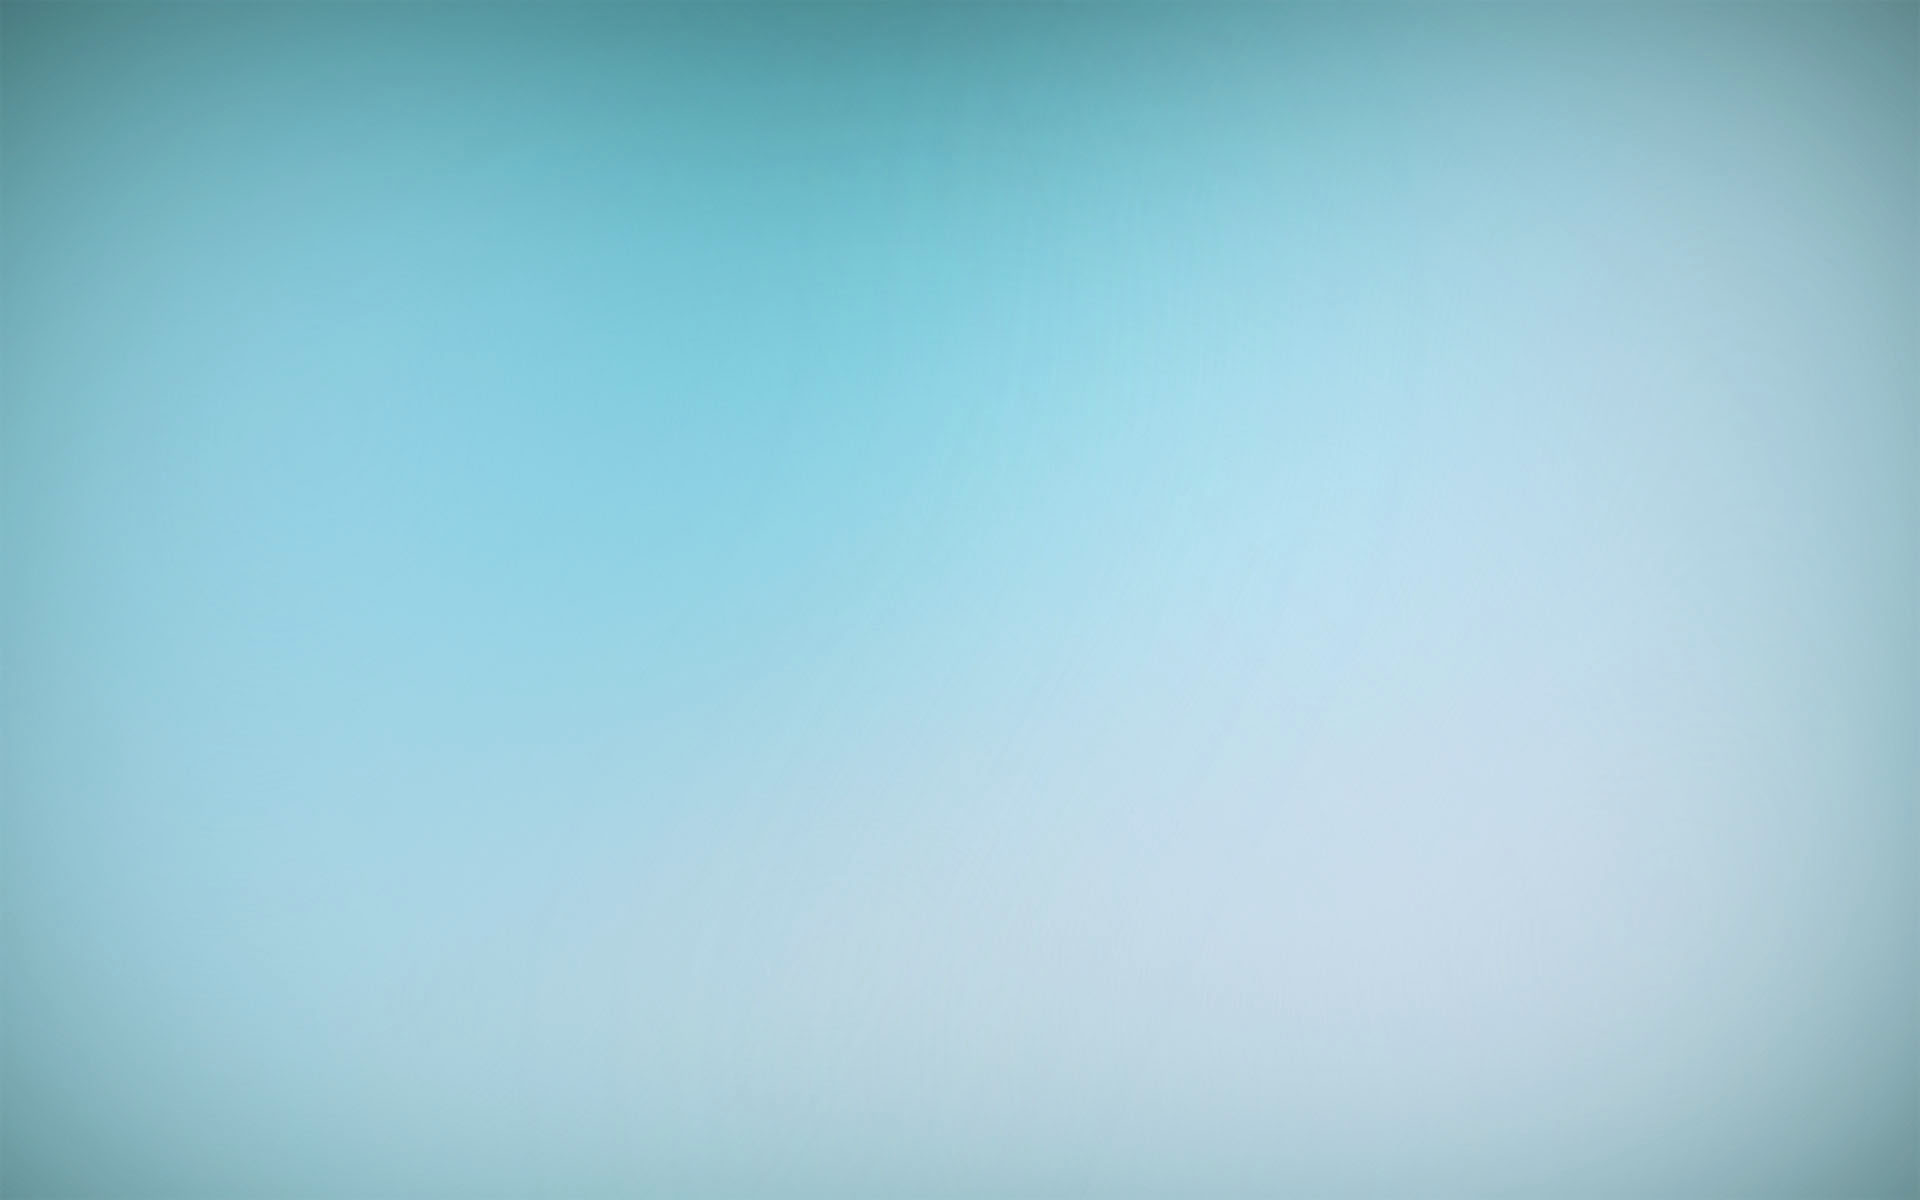 Business Clean CyanBlue   Cool Backgrounds